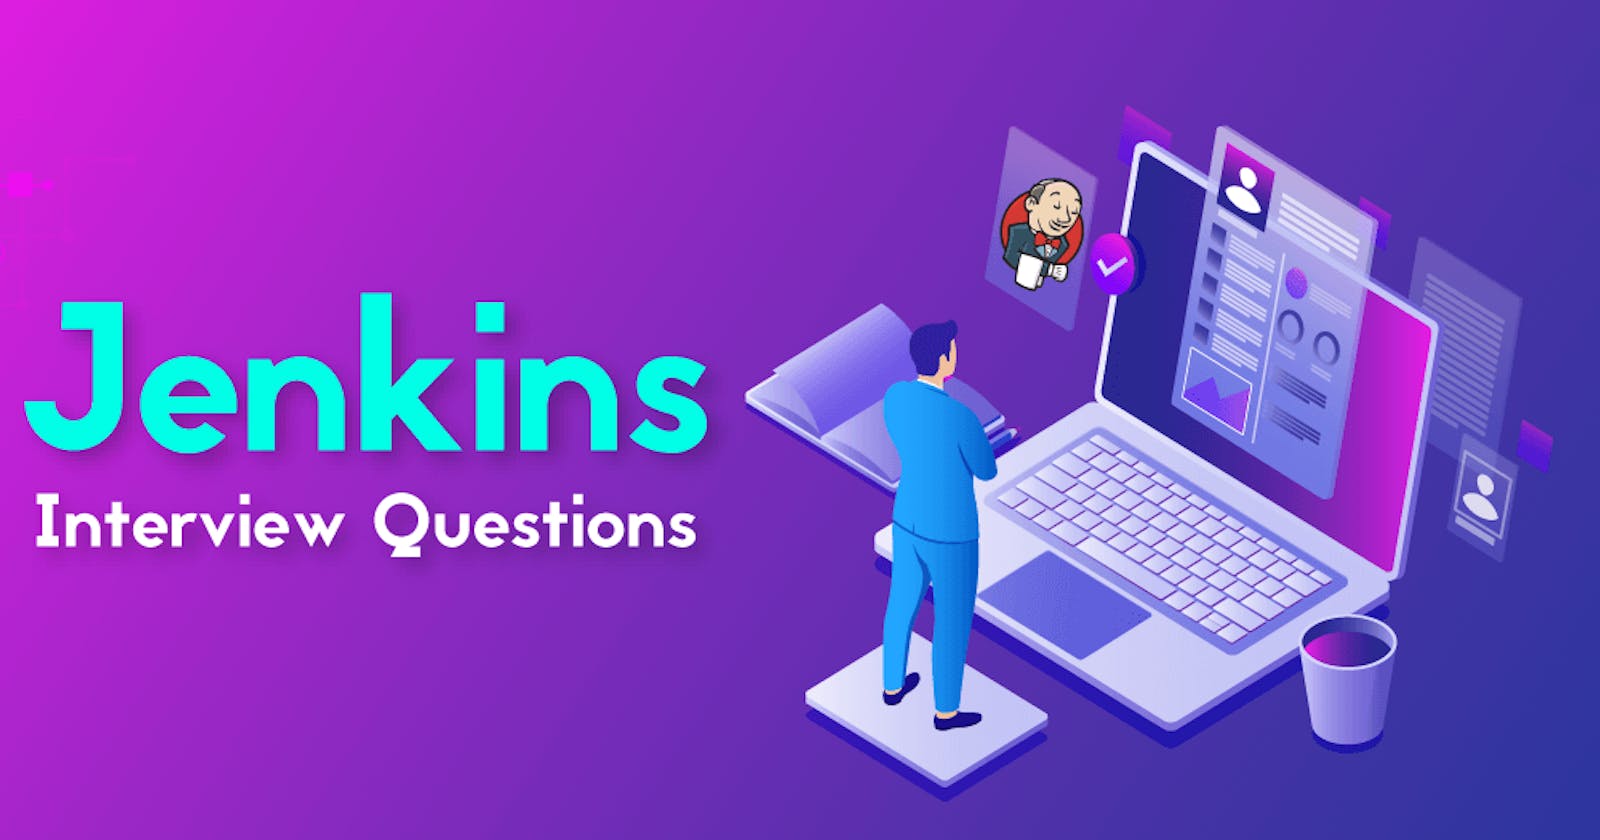 Mastering Jenkins Interview Questions